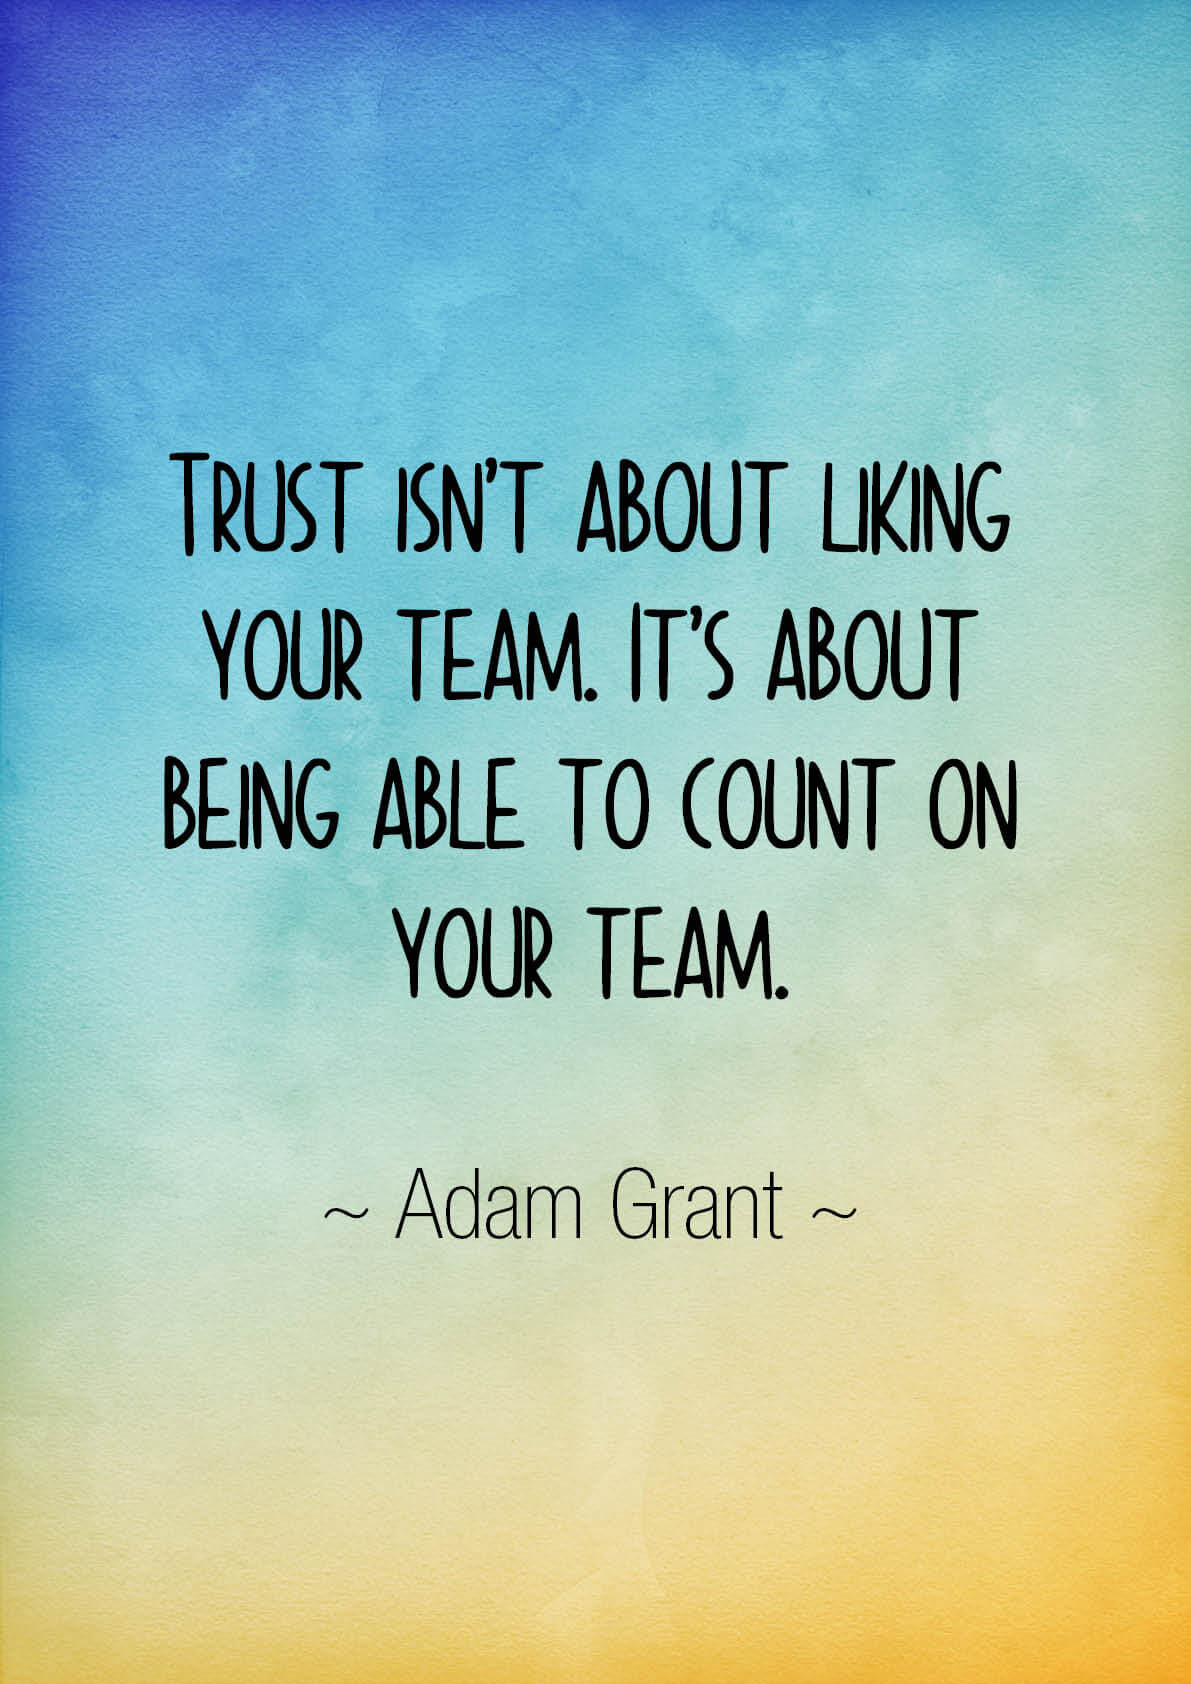 trust isn’t about liking your team. it’s about being able to count on your team. adam grant